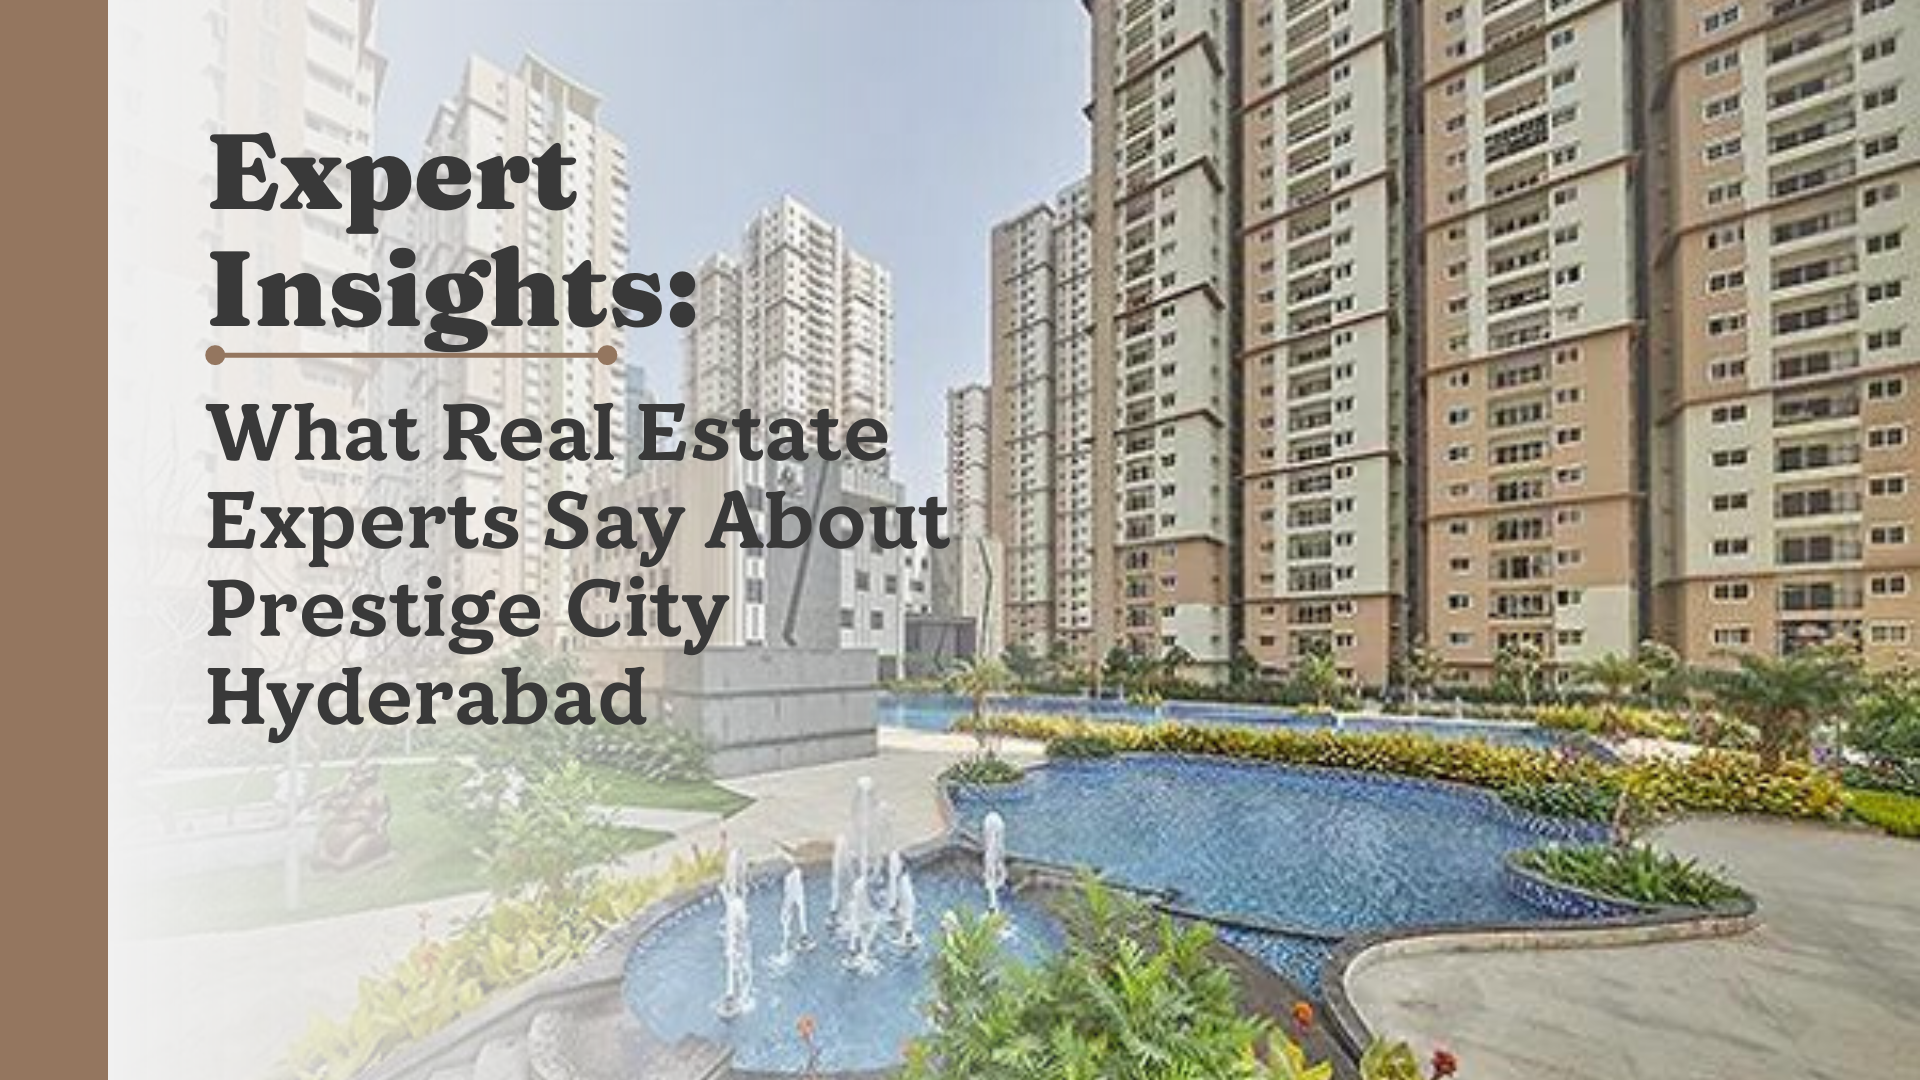 Expert Insights: What Real Estate Experts Say About Prestige City Hyderabad